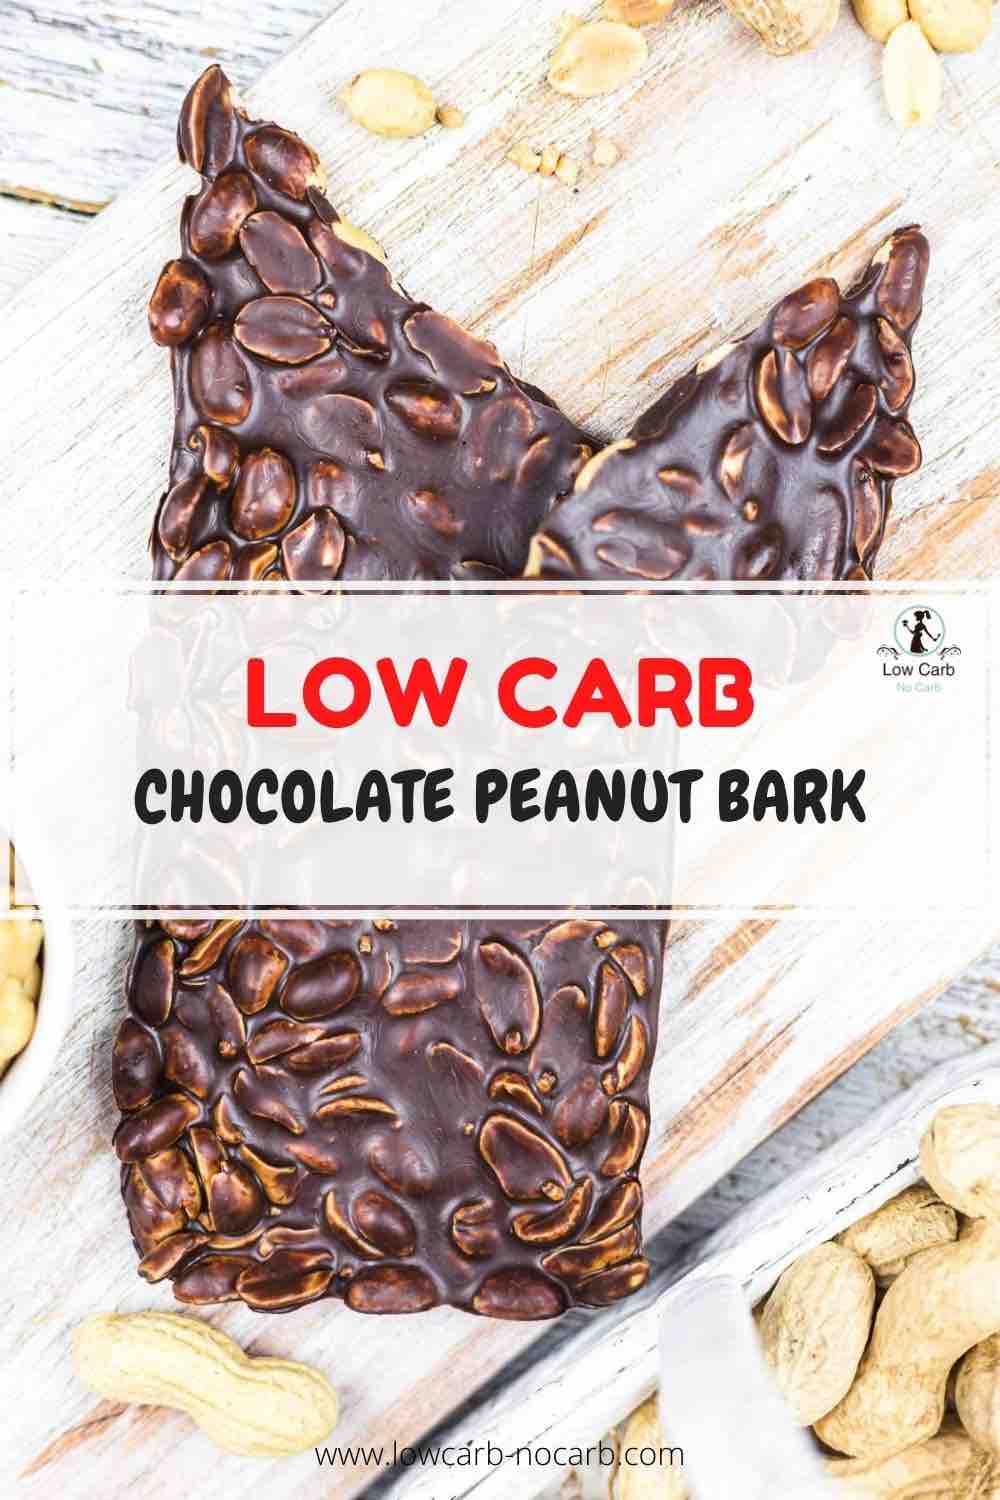 A piece of low carb chocolate peanut bark, displayed on a wooden surface.